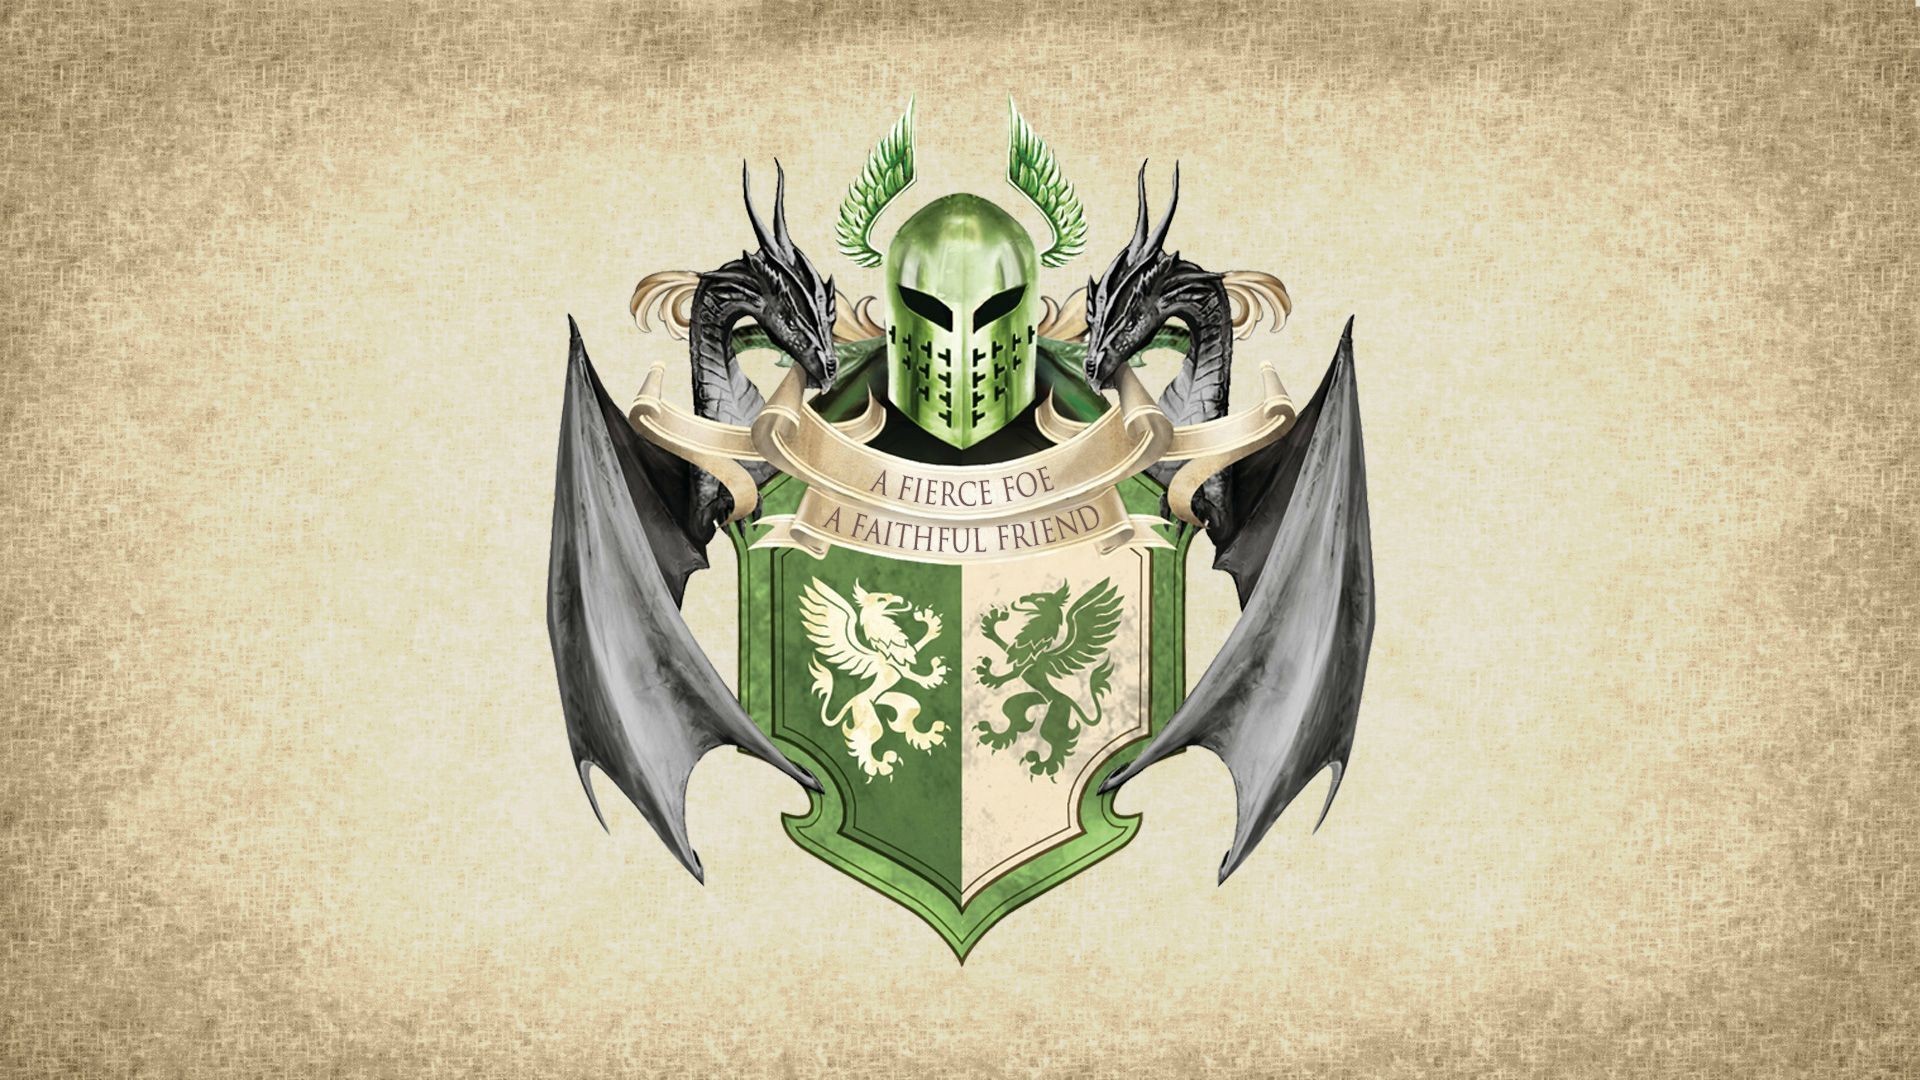 Game Of Thrones, Artwork, Paper, Coats Of Arms, Sigils Wallpaper